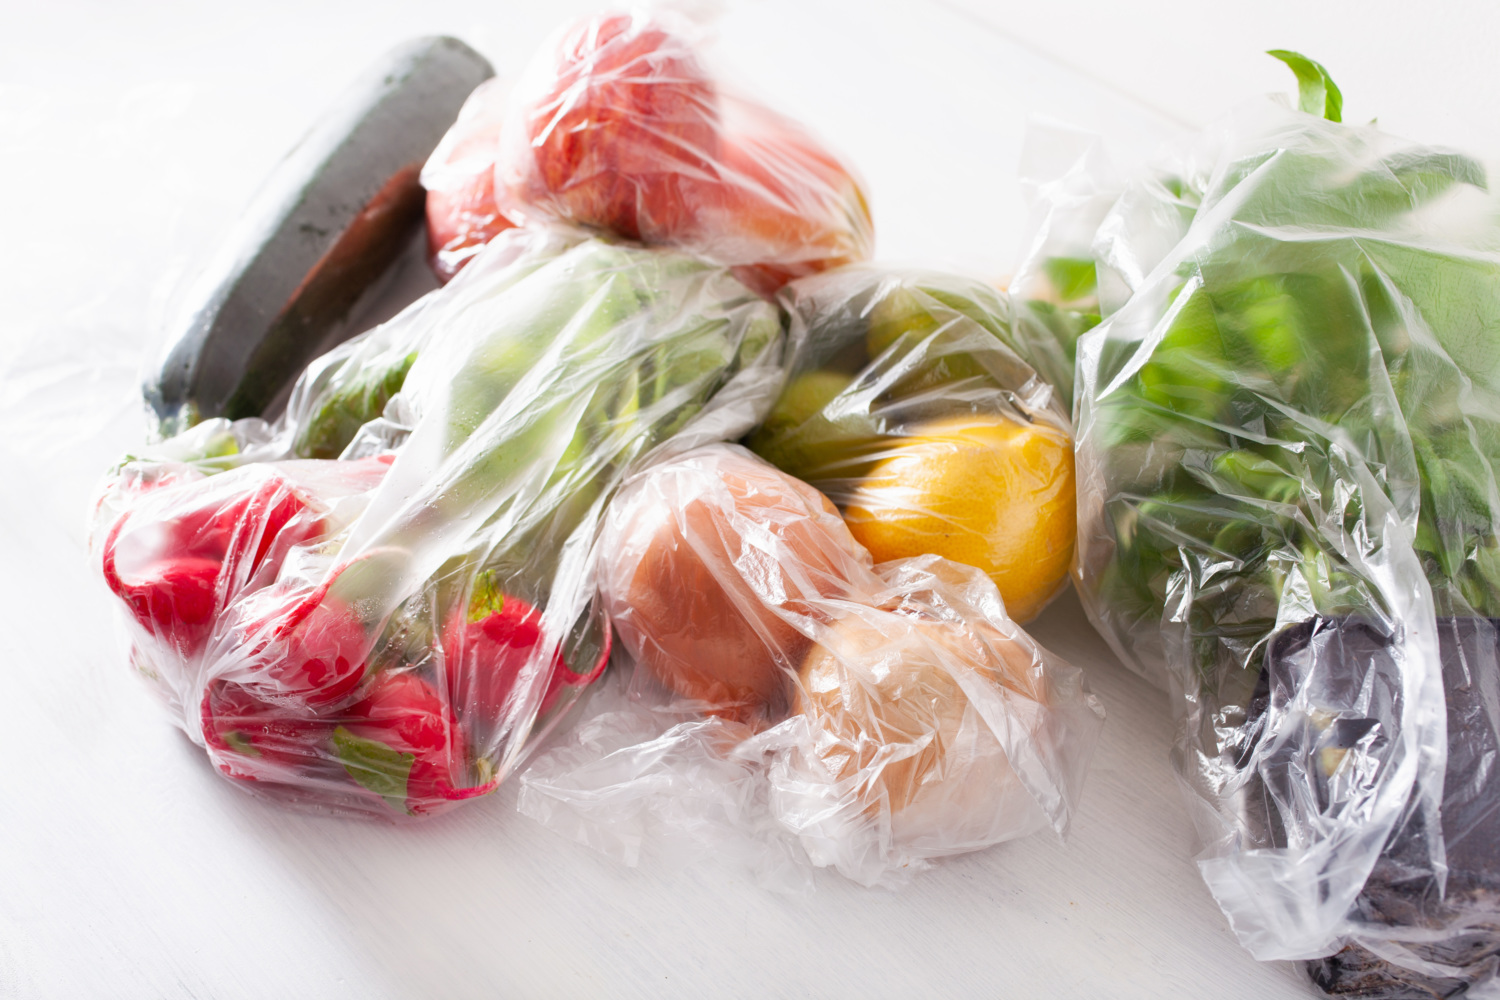 Can grocery stores help solve the plastic pollution crisis?